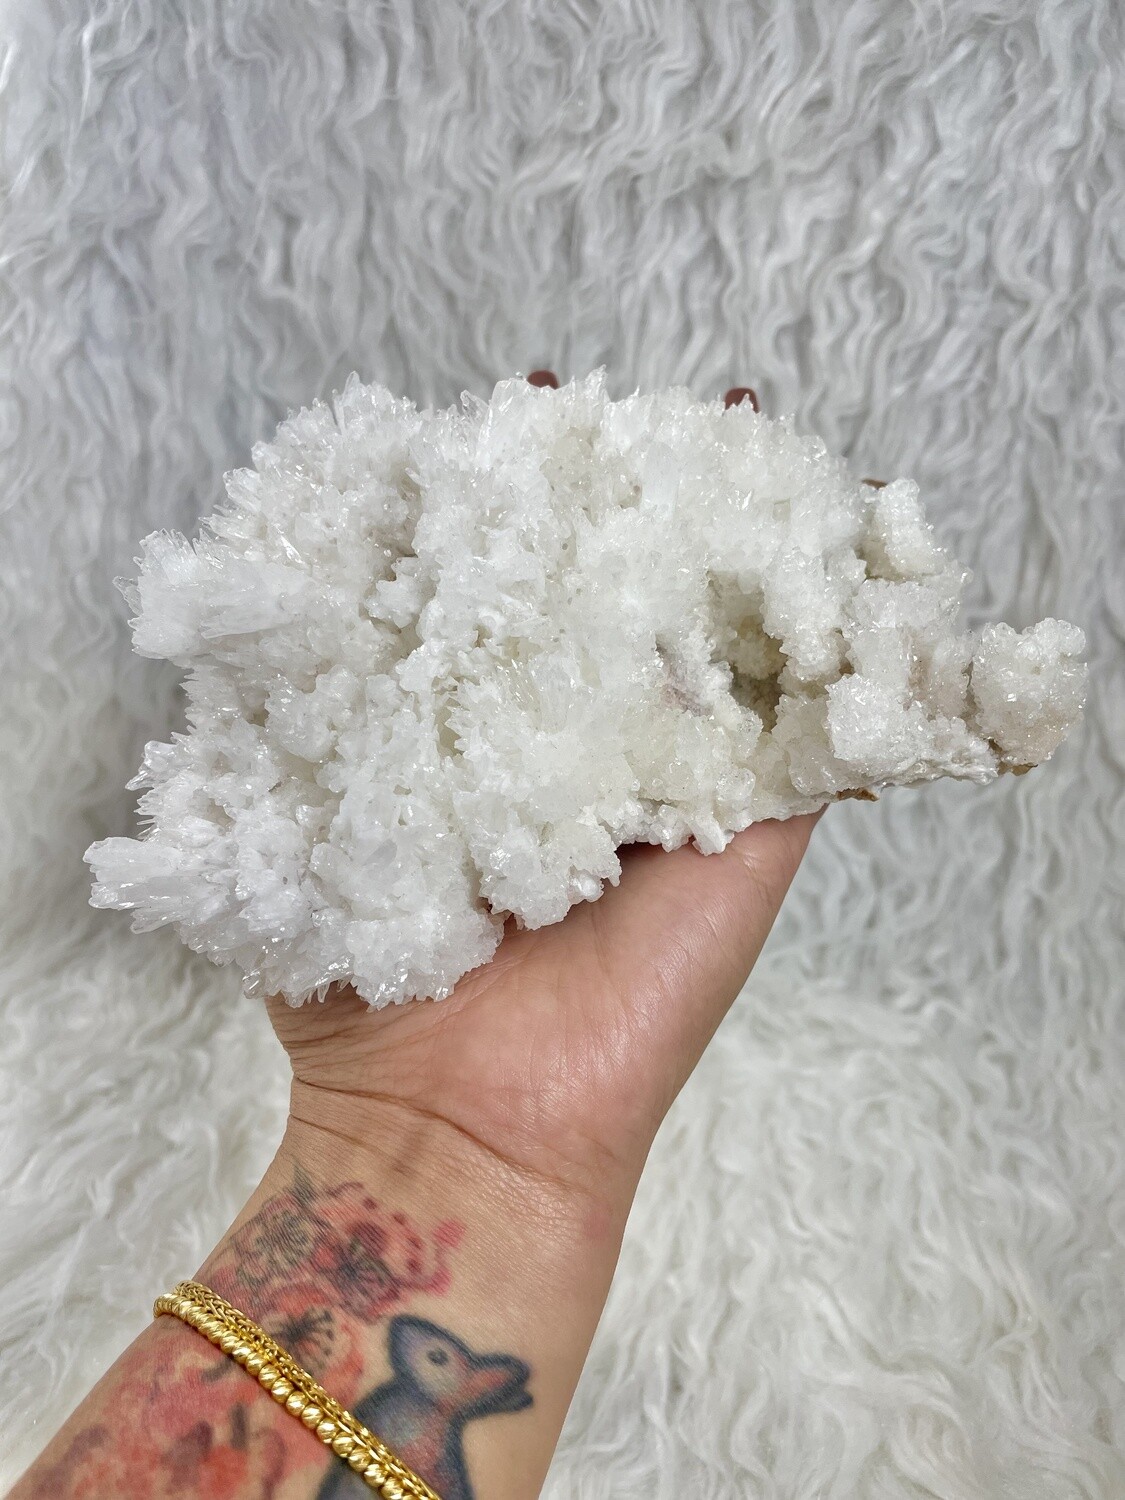 Frosty Mexican Aragonite Calcite